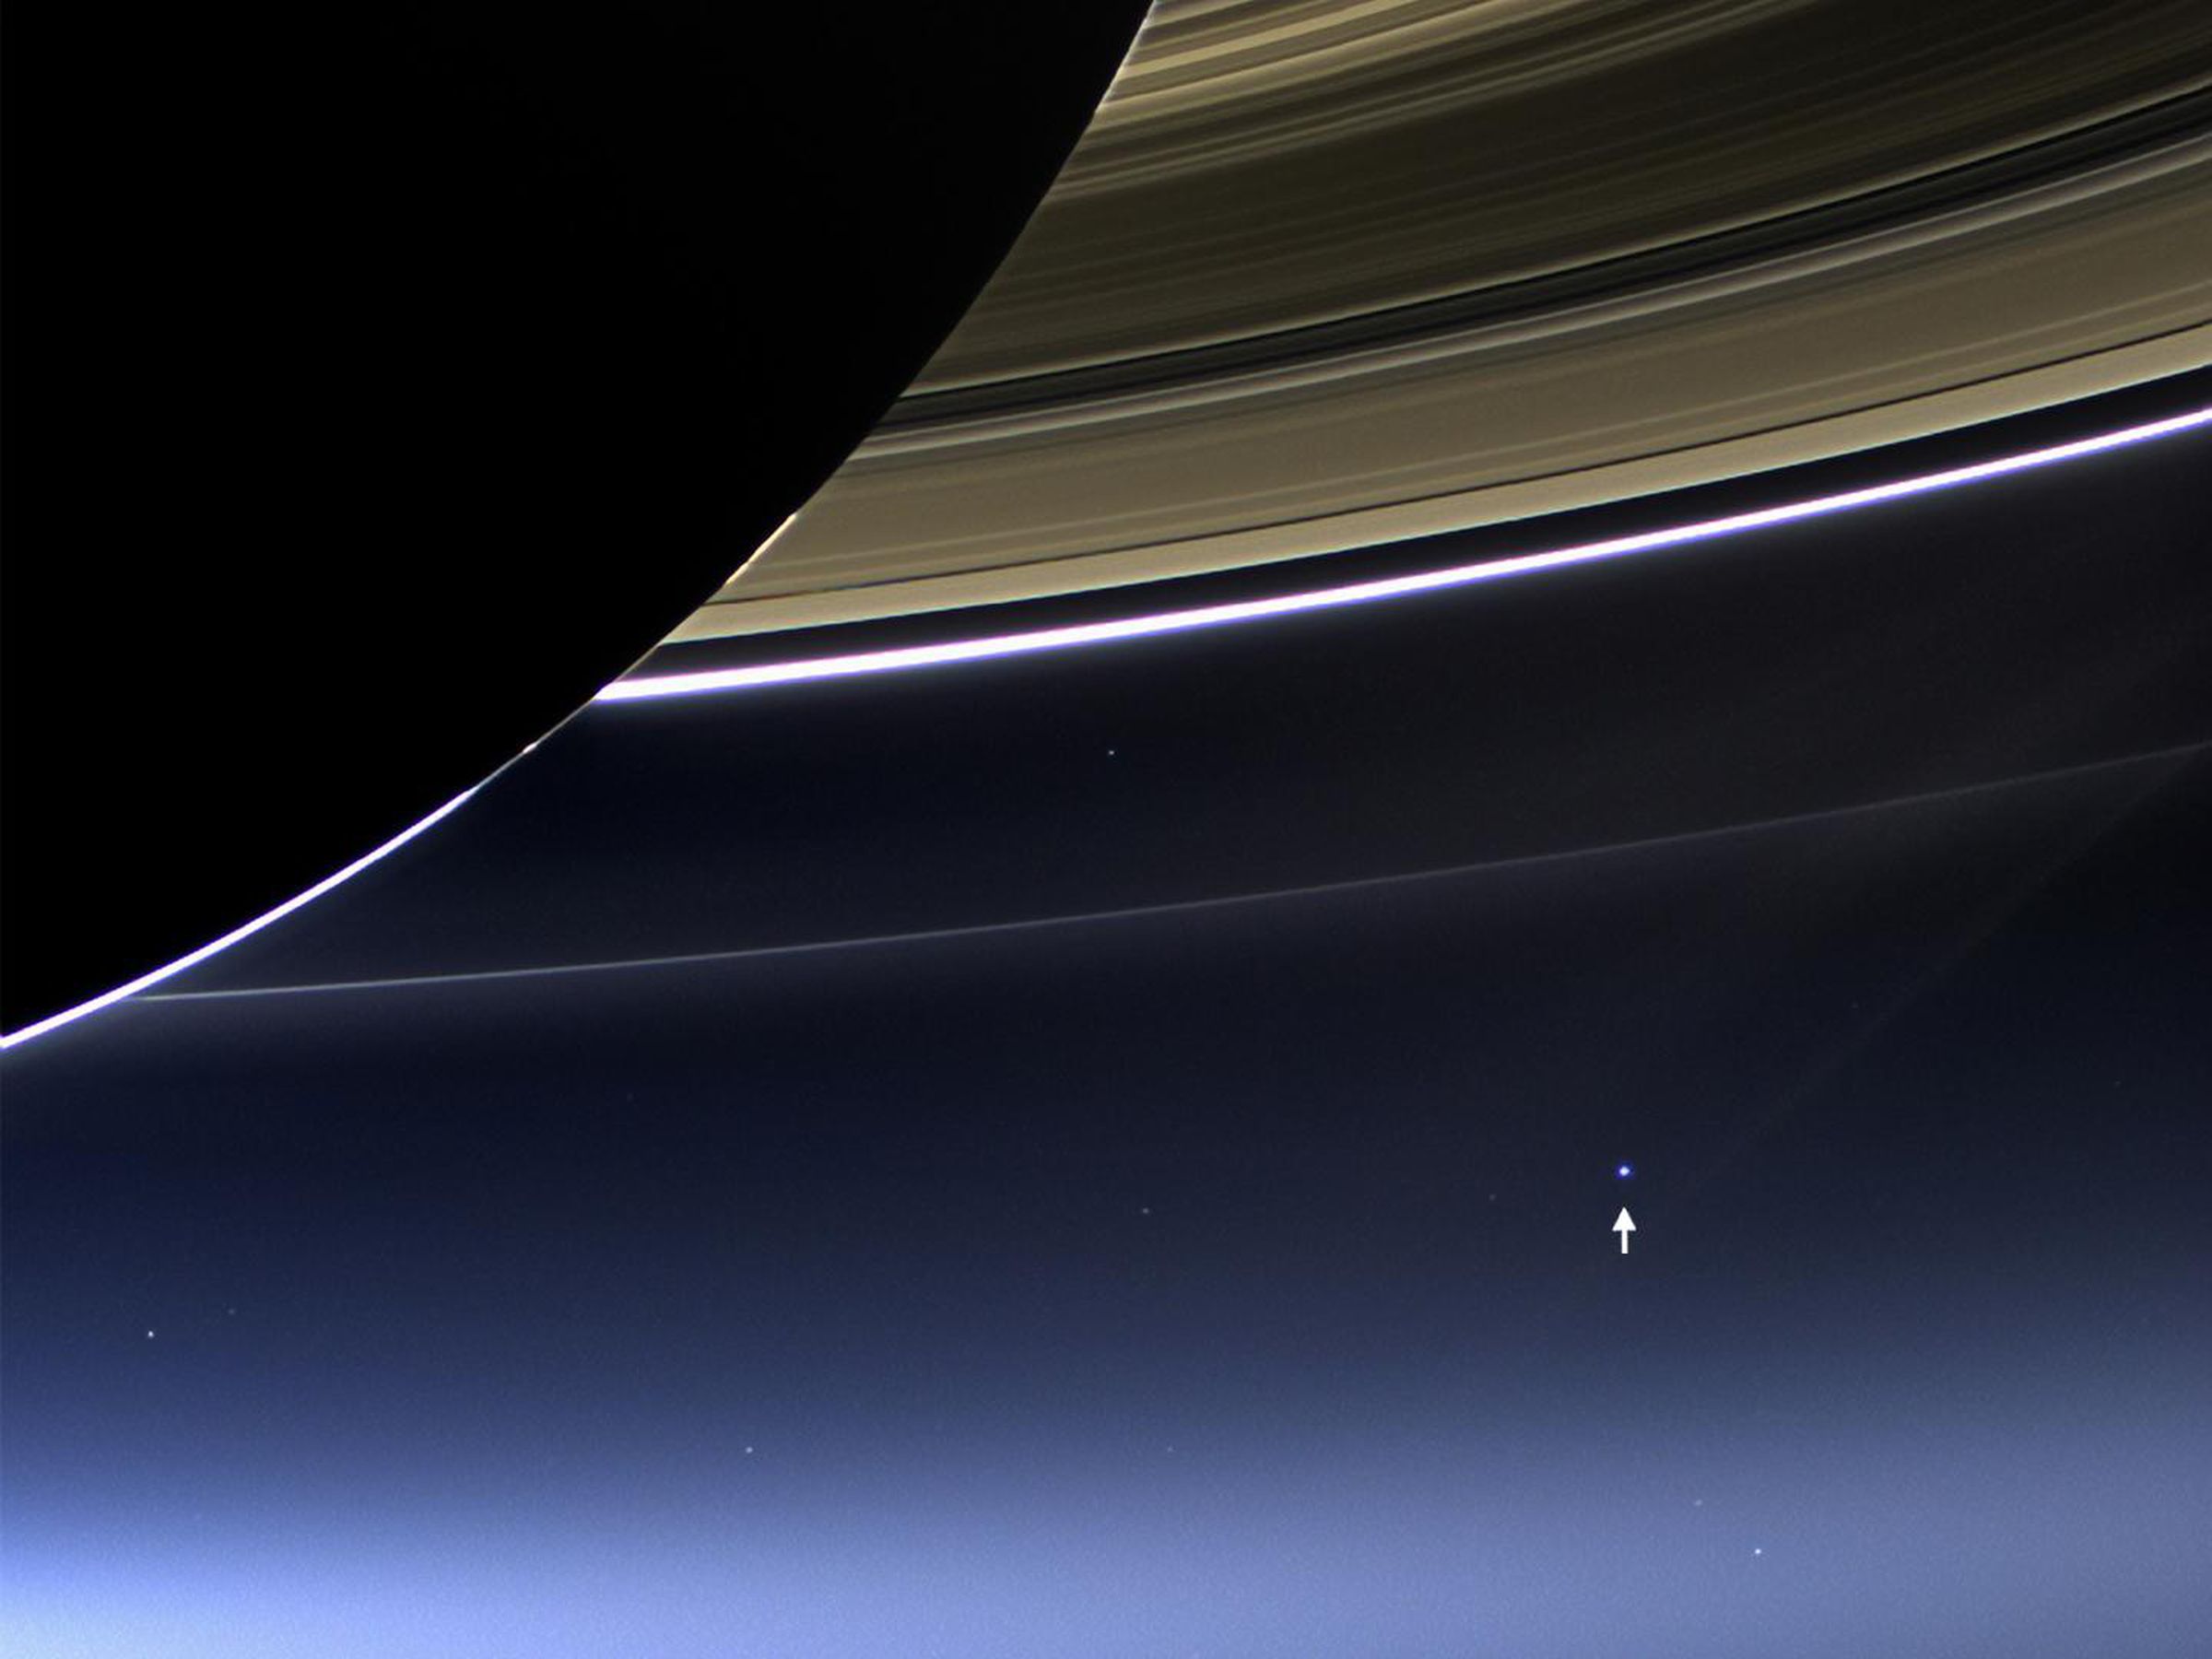 Our planet viewed from Saturn, photographed on July 19th, 2013.